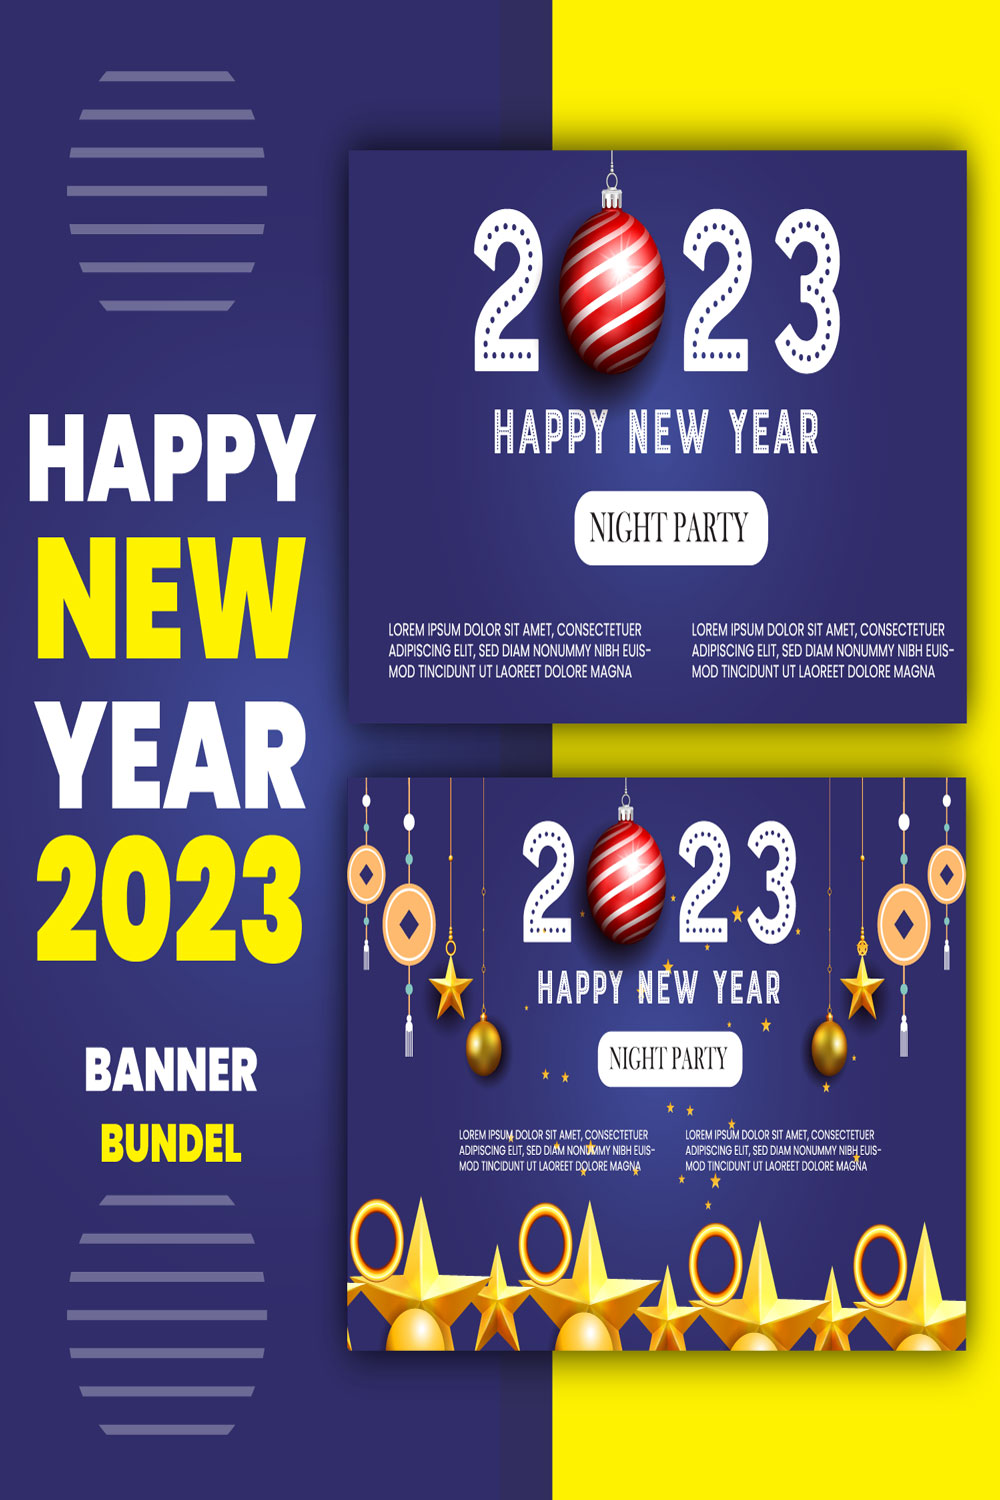 Blue and Yellow Banner Merry Christmas 2023 Design pinterest image.